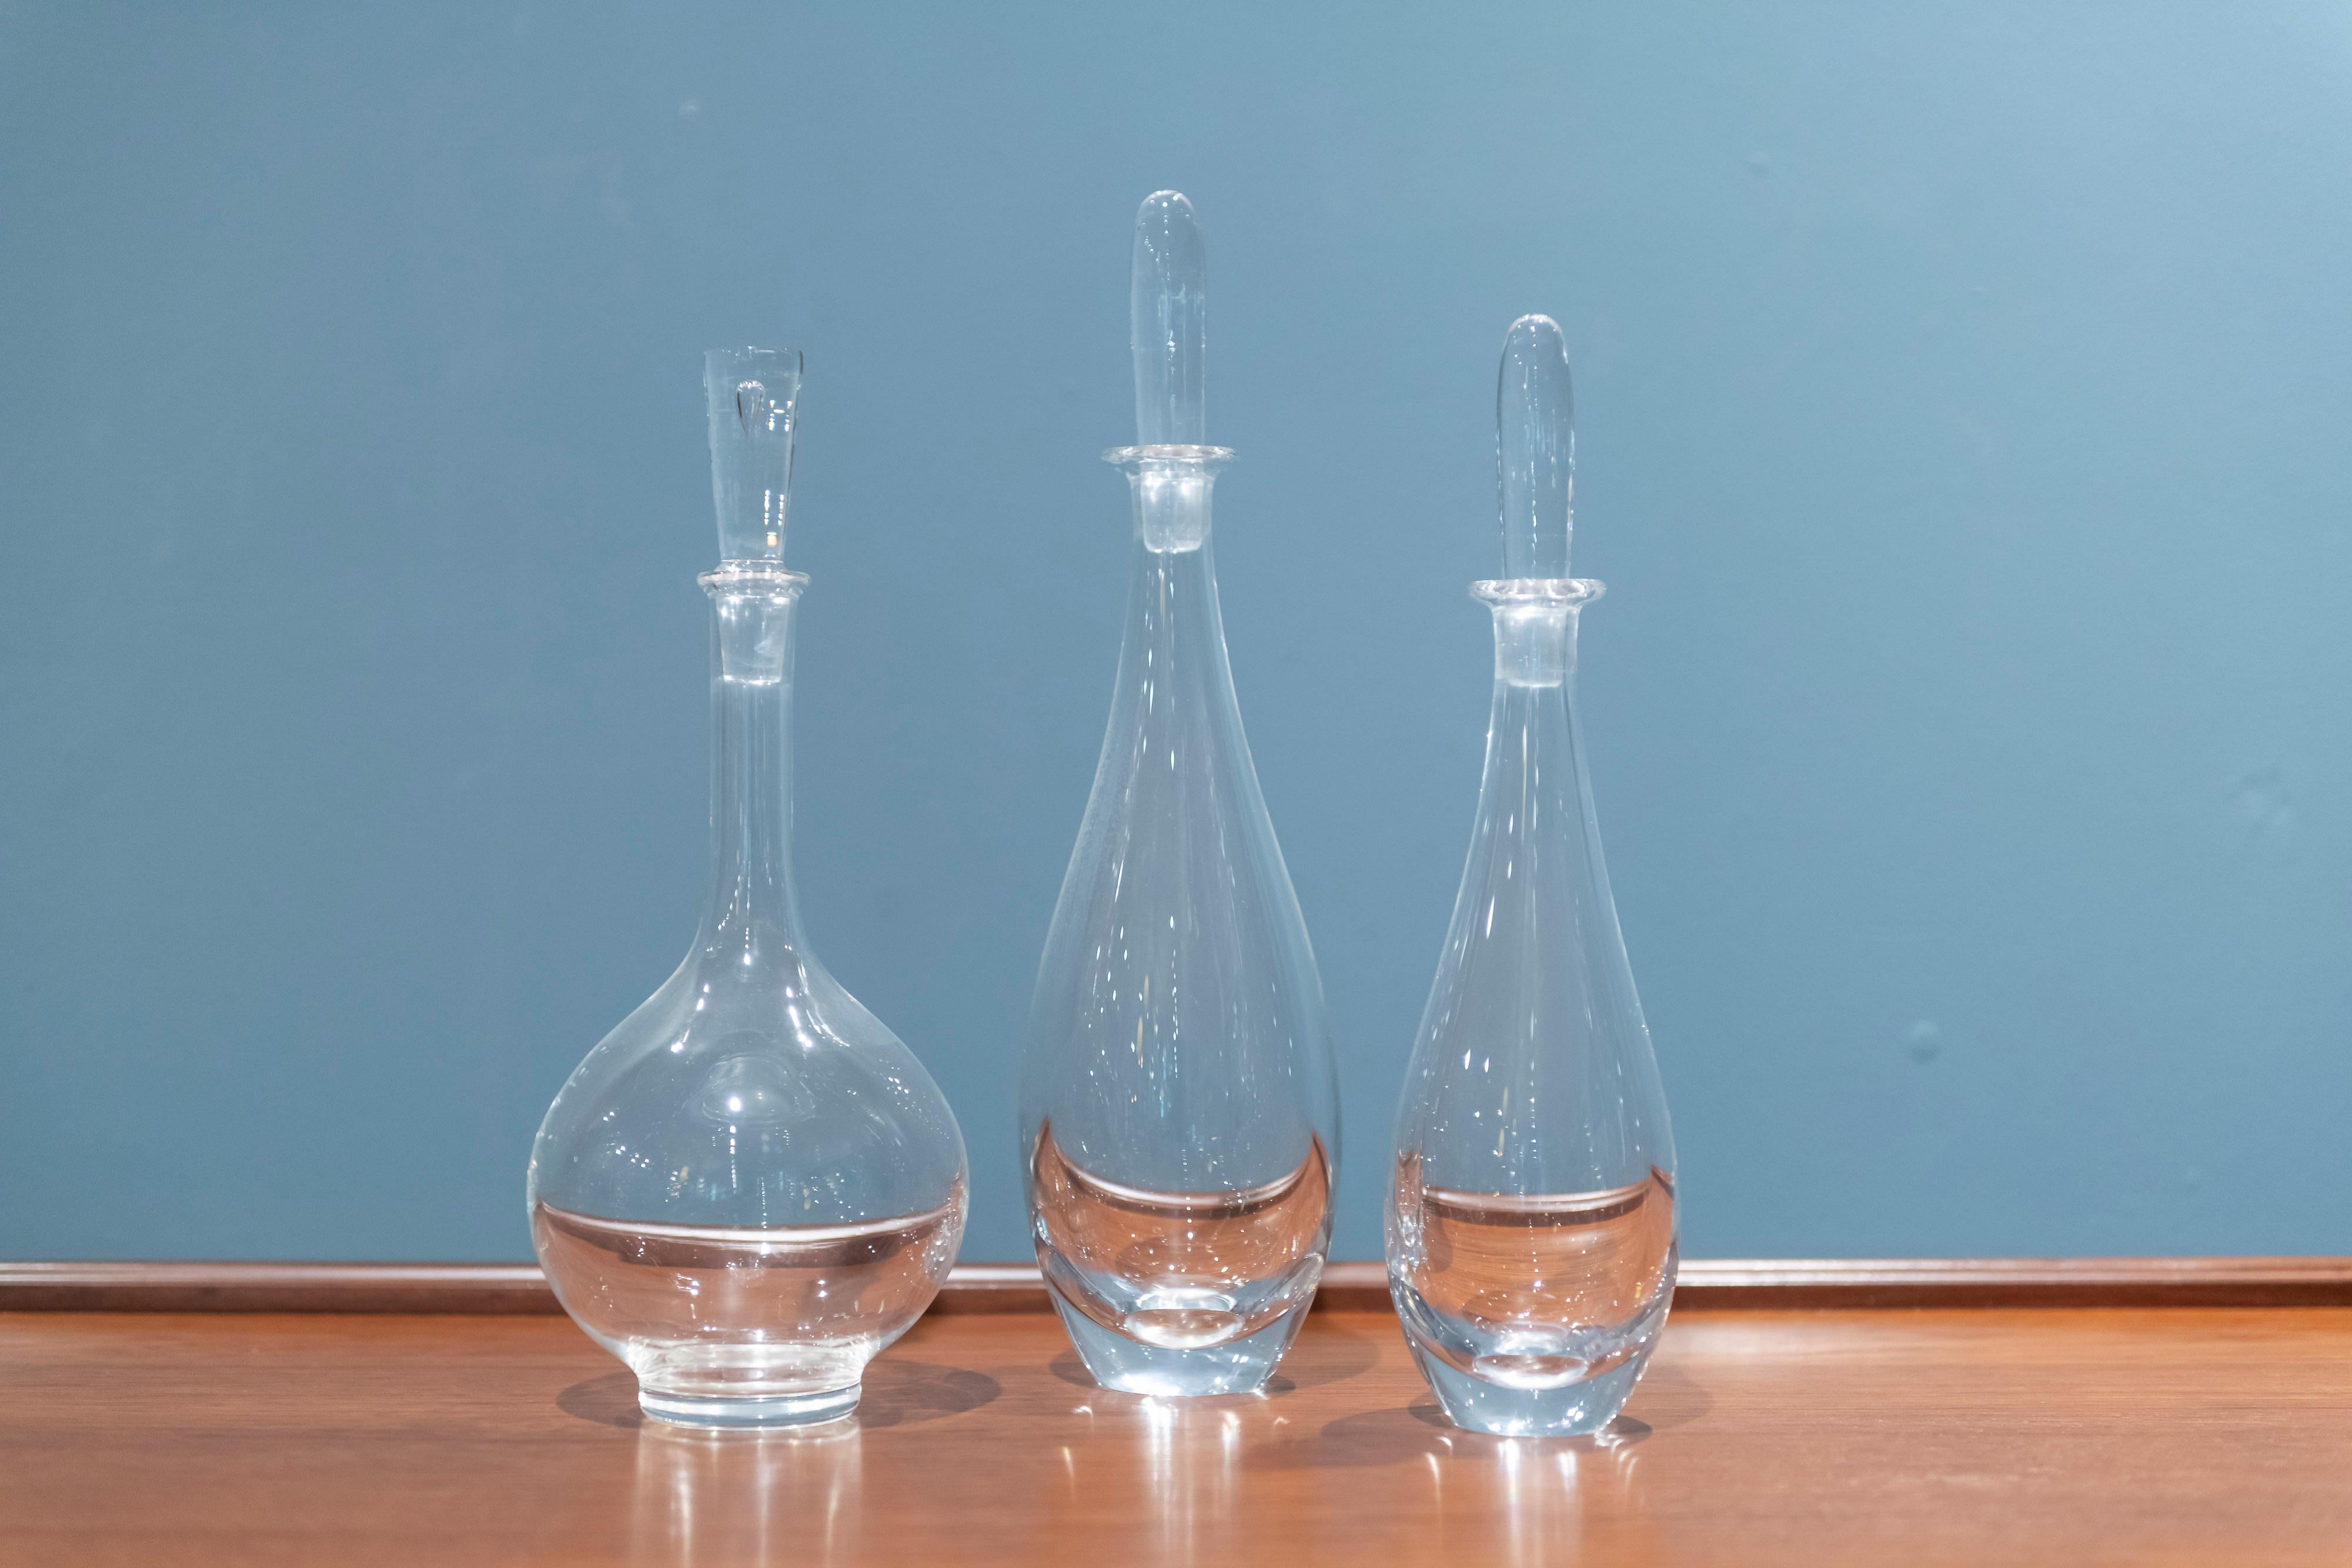 Pair of Orrefors decanters designed by Bjorn Wiinblad and a single Steuben glass decanter, all signed.